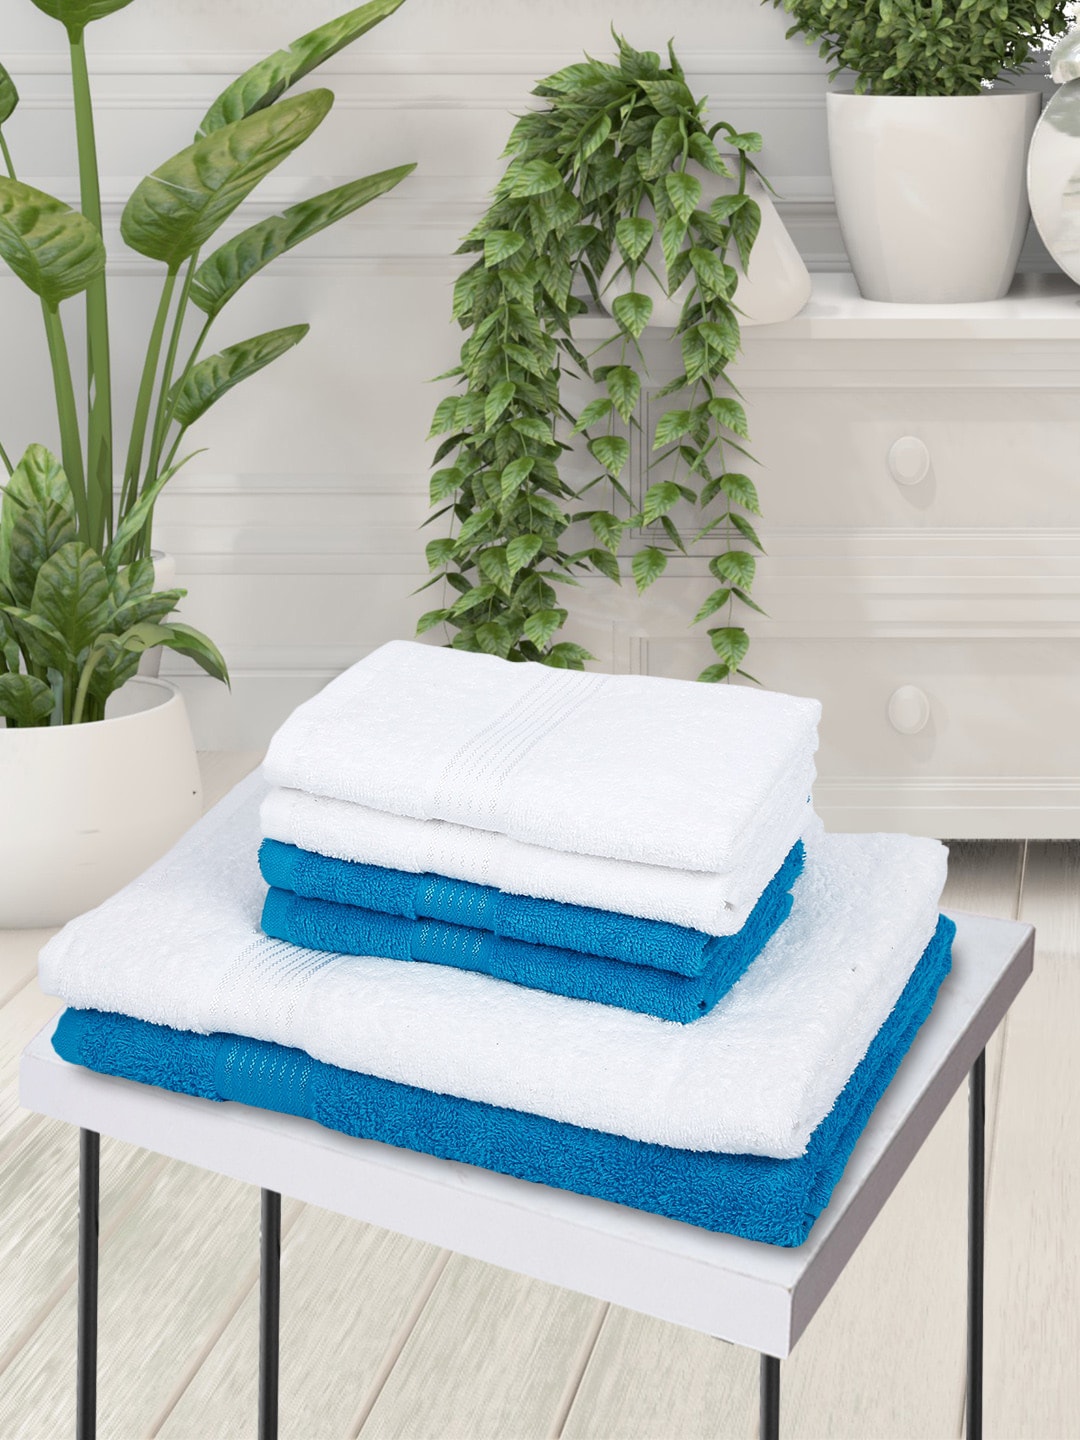 BIANCA Set Of 6 White Solid Pure Cotton 380 GSM Super-Soft Bath Towels Price in India